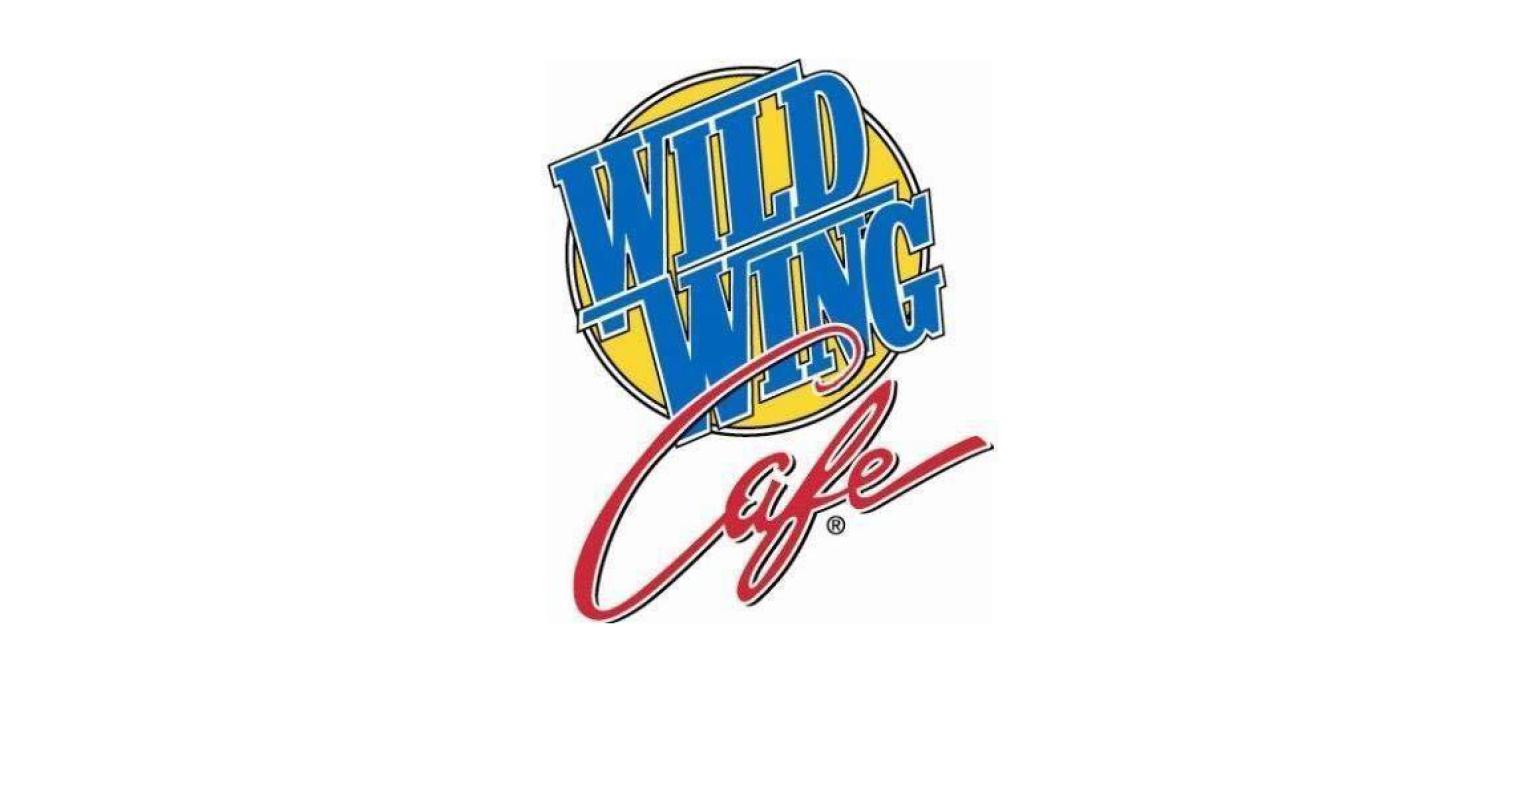 Wild Wing Café files for Chapter 11 bankruptcy